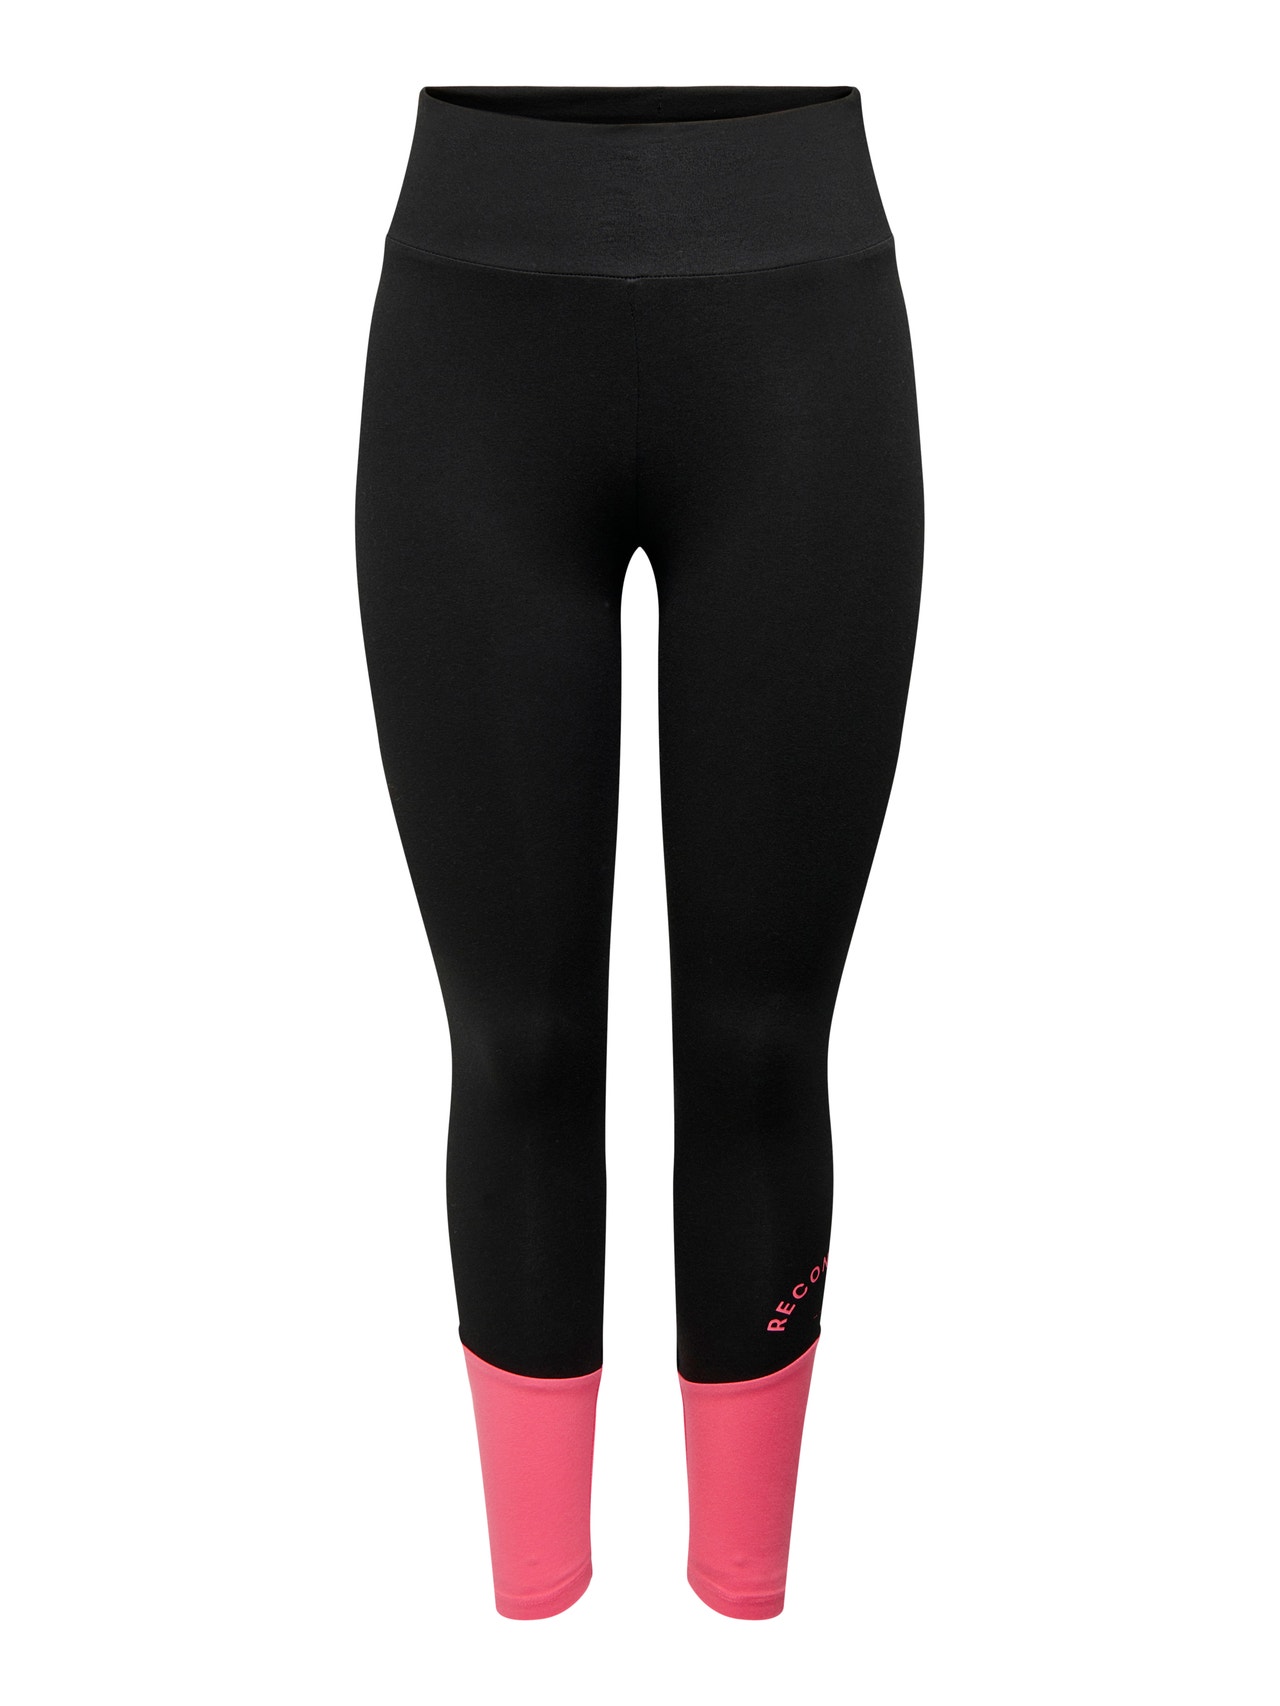 ONLY Tight Fit High waist Leggings -Black - 15281014